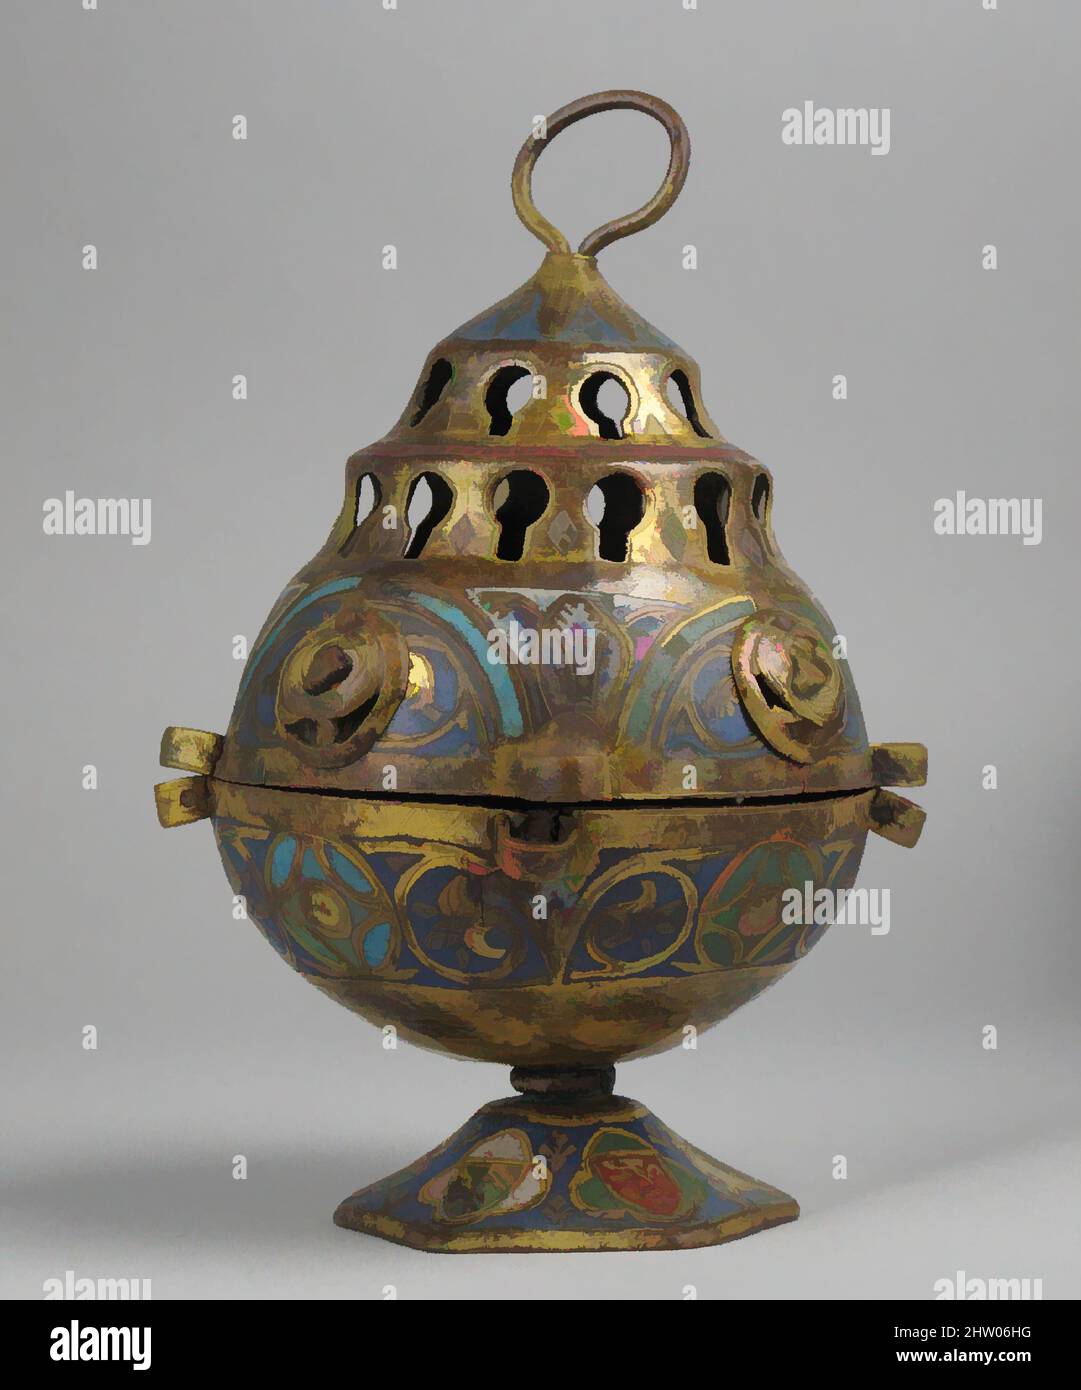 Art inspired by Censer, 13th century, Made in Limoges, France, French, Copper: pierced, engraved, and gilt; champlevé enamel: medium blue, green, yellow, red, and white., 7 1/2 x 5 1/8 in (19 x 13 cm), Enamels-Champlevé, Classic works modernized by Artotop with a splash of modernity. Shapes, color and value, eye-catching visual impact on art. Emotions through freedom of artworks in a contemporary way. A timeless message pursuing a wildly creative new direction. Artists turning to the digital medium and creating the Artotop NFT Stock Photo